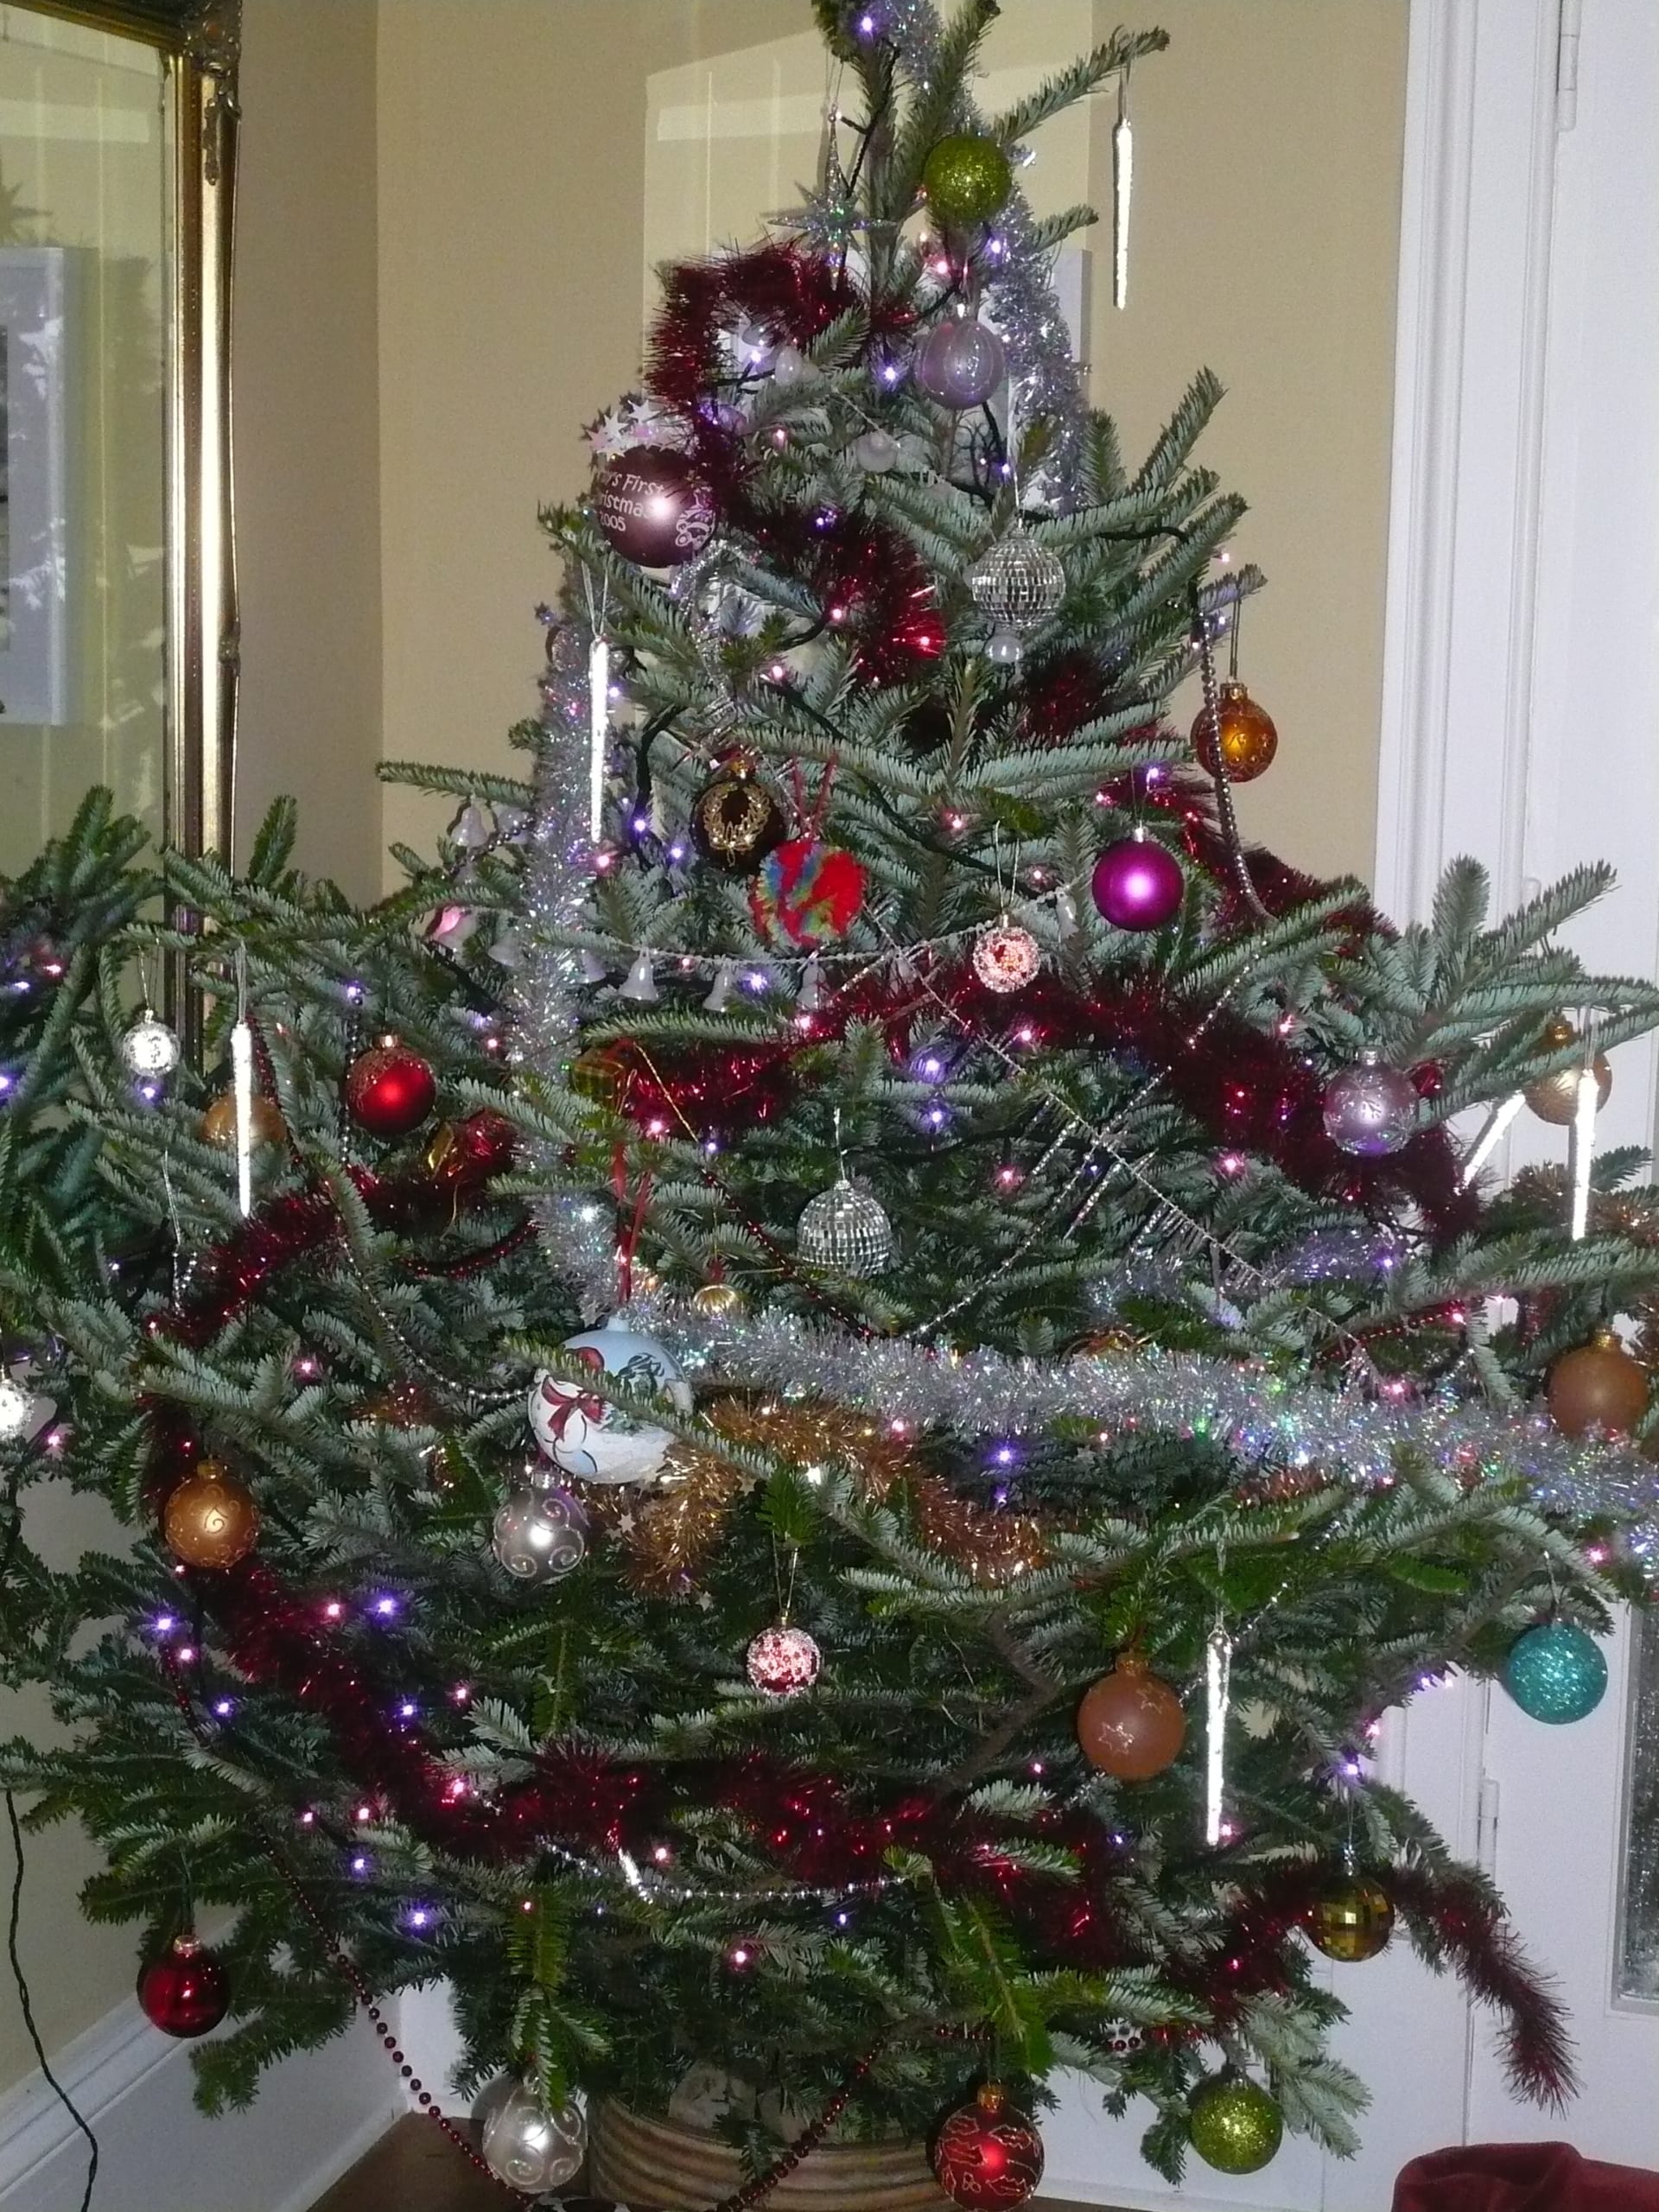 A Christmas tree decorated with baubles, tinsel and lights